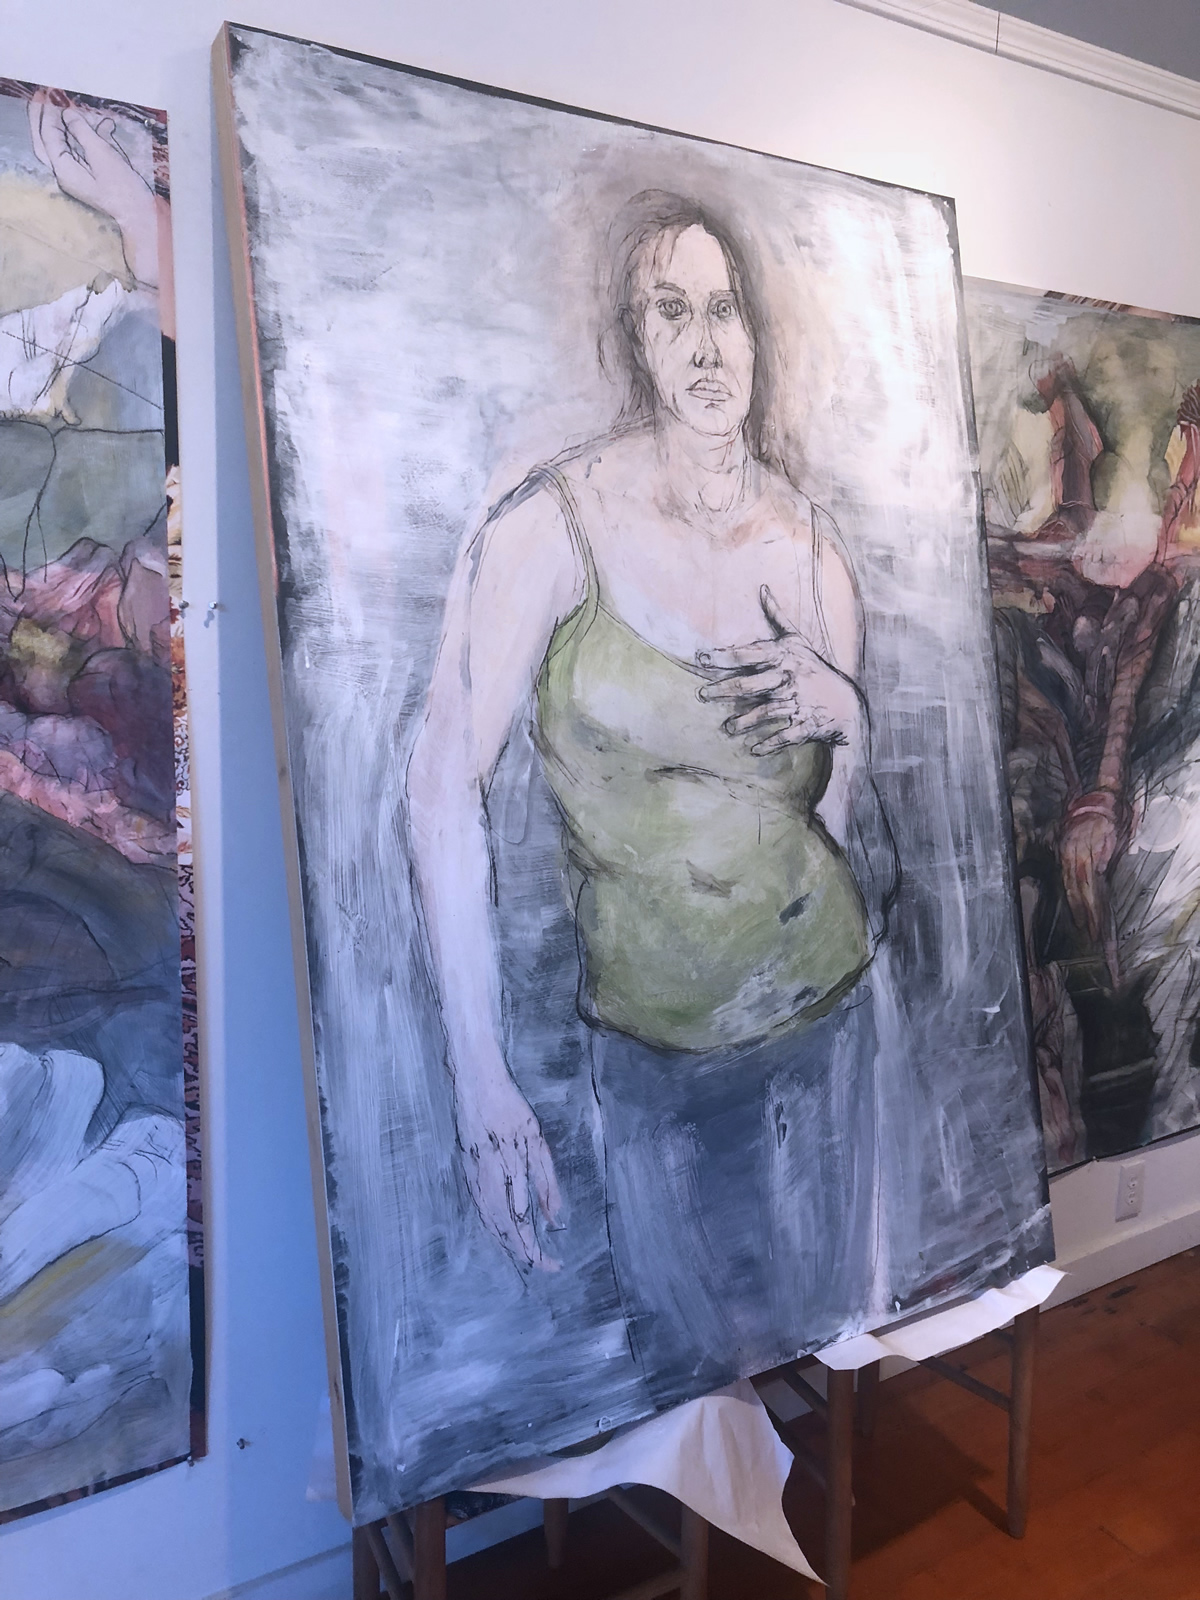 “Figure Study / Hidden Story” at the Healdsburg Center for the Arts